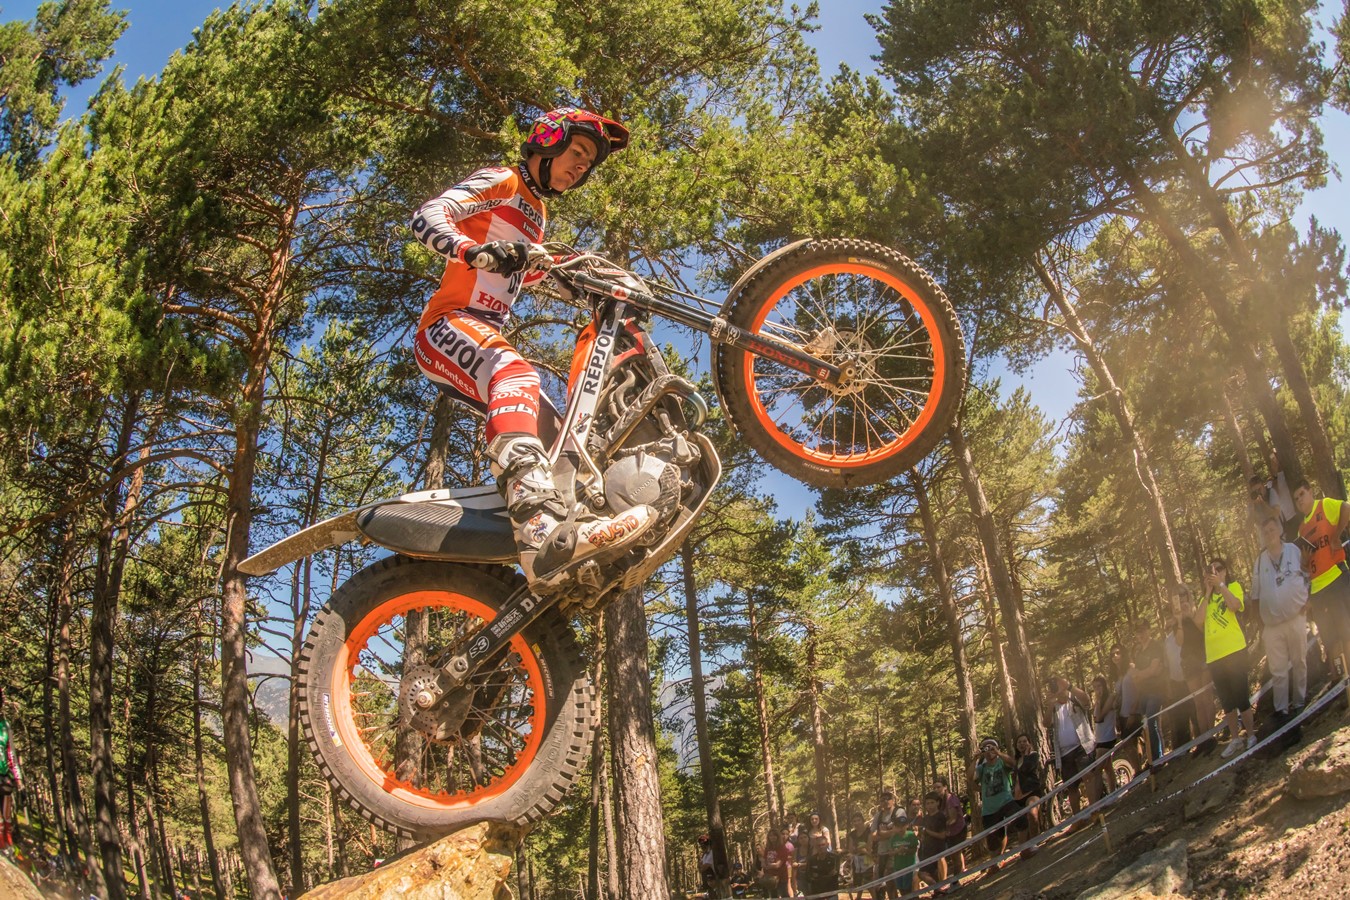 Jaime Busto gets his first podium place in the TrialGP World Championship